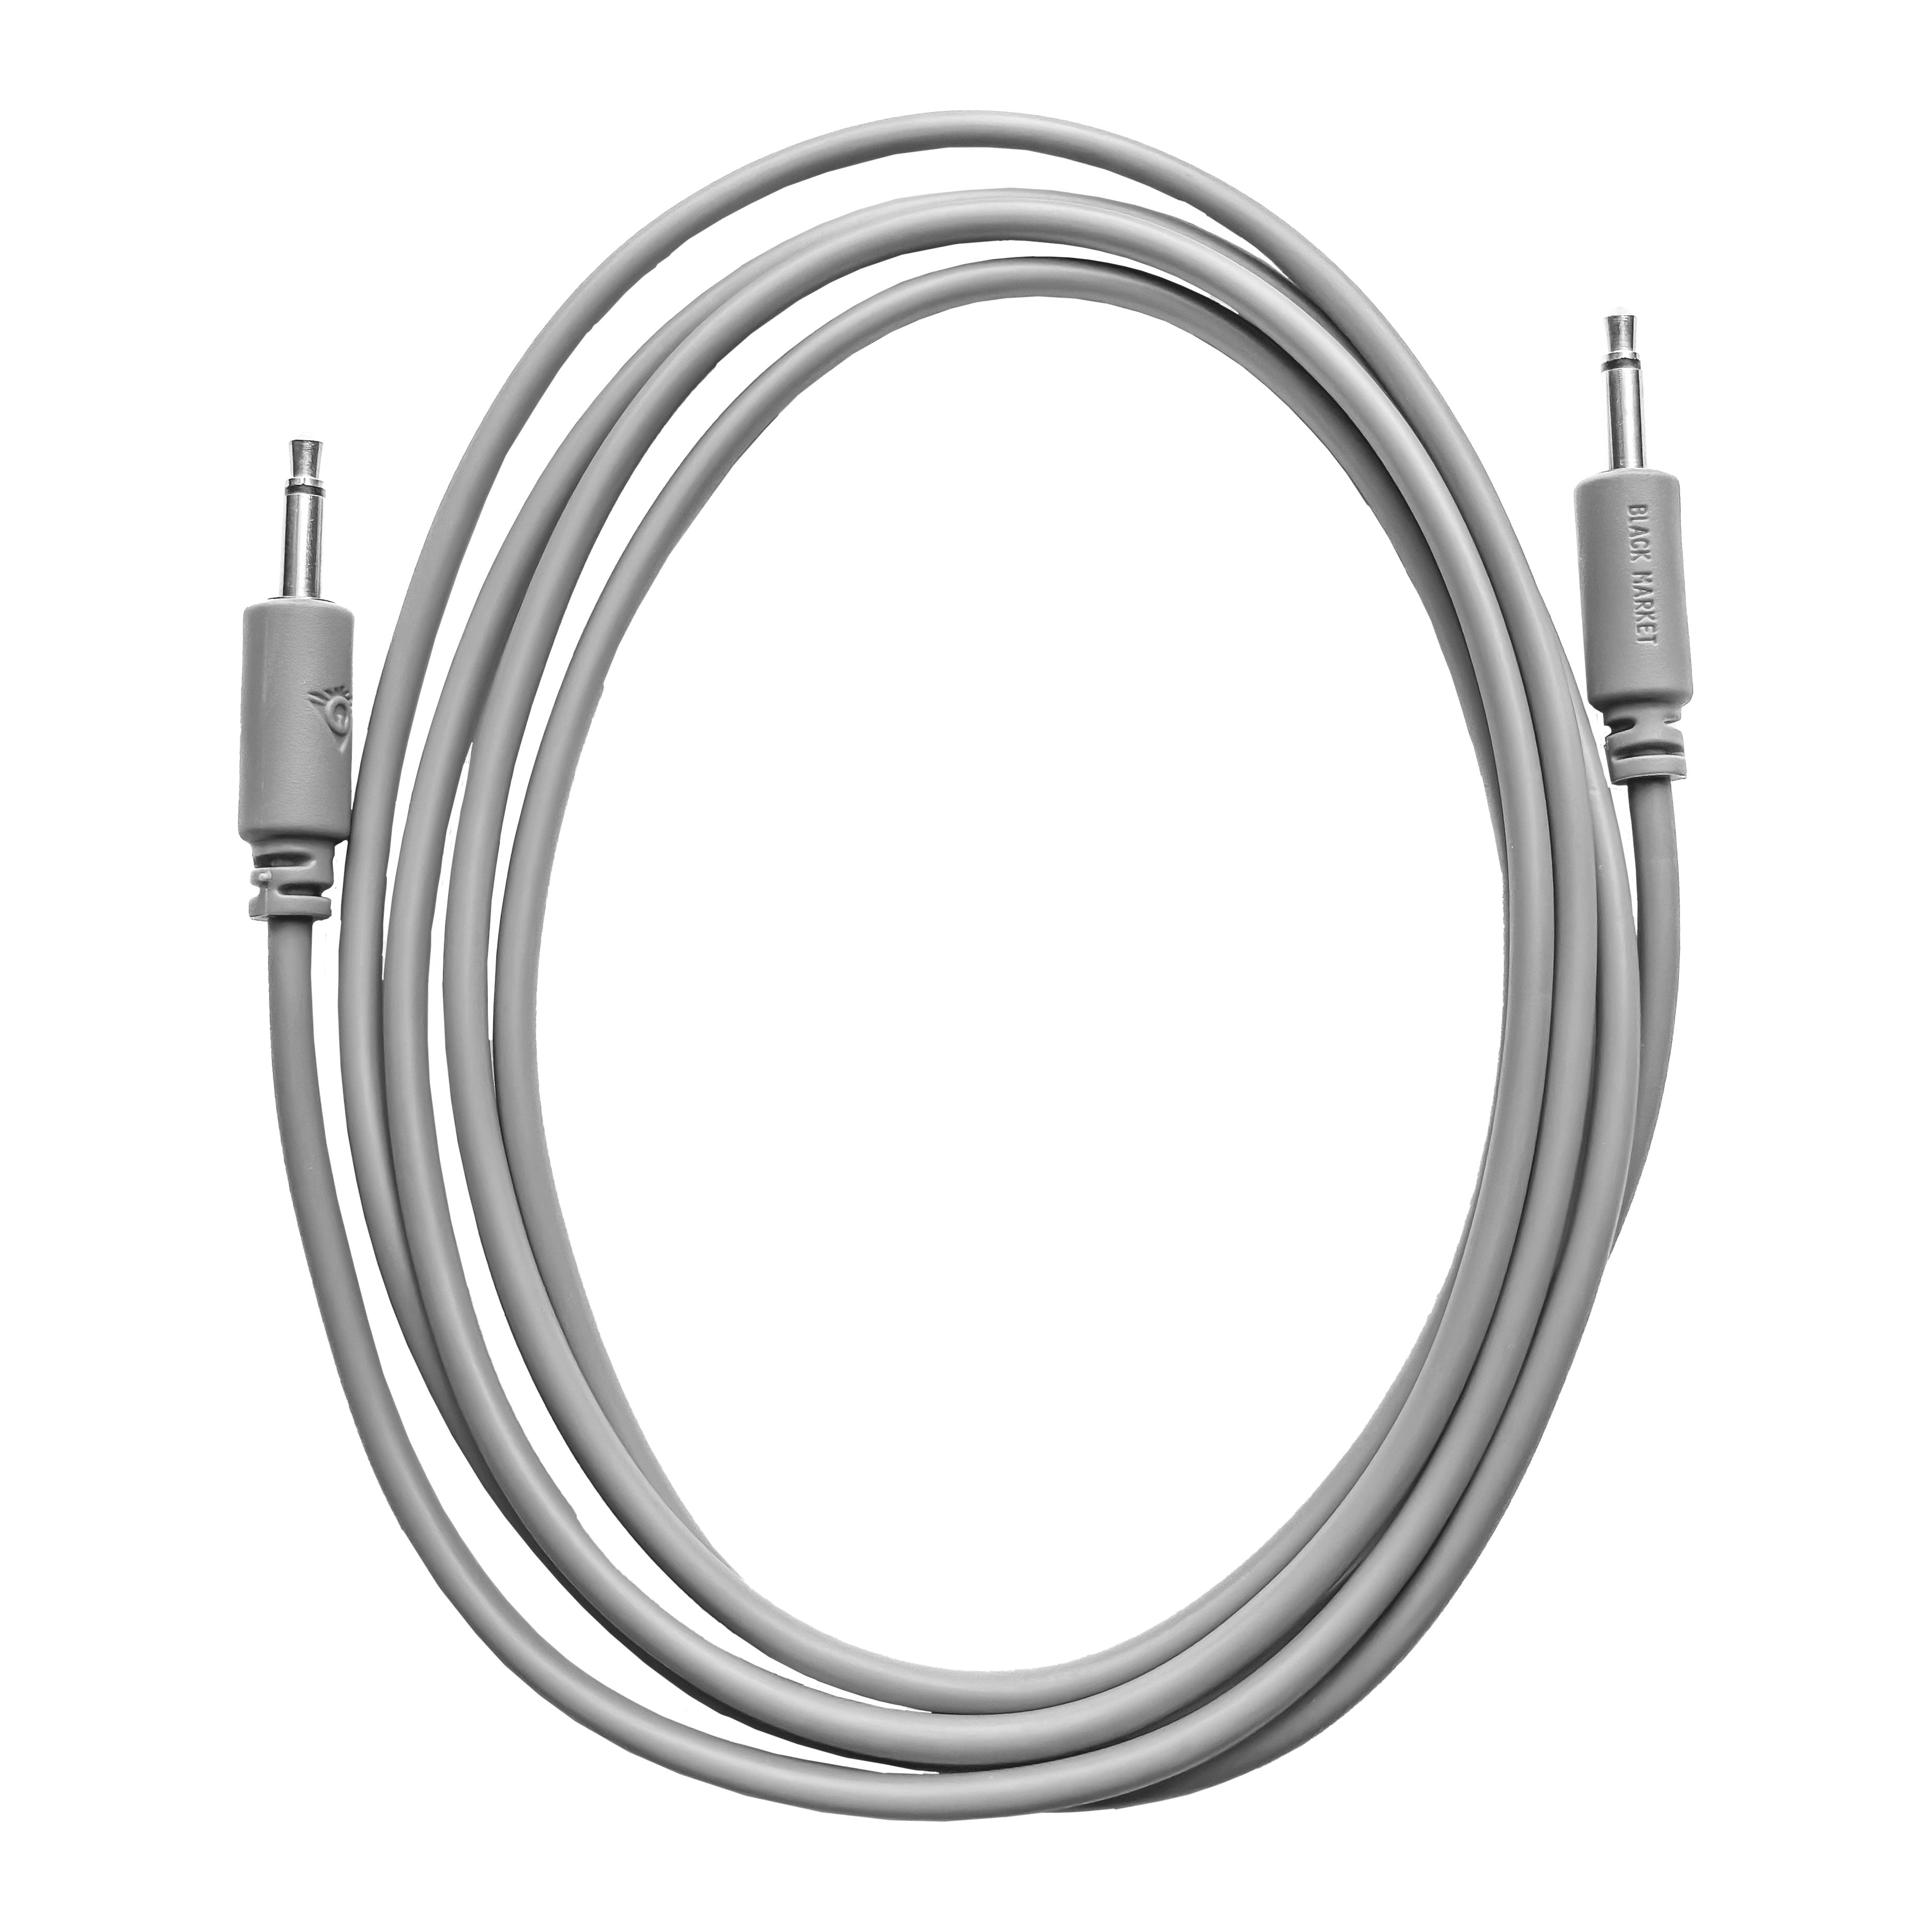 Black Market Modular 3.5mm Patch Cable - 100cm/40" - Gray View 1